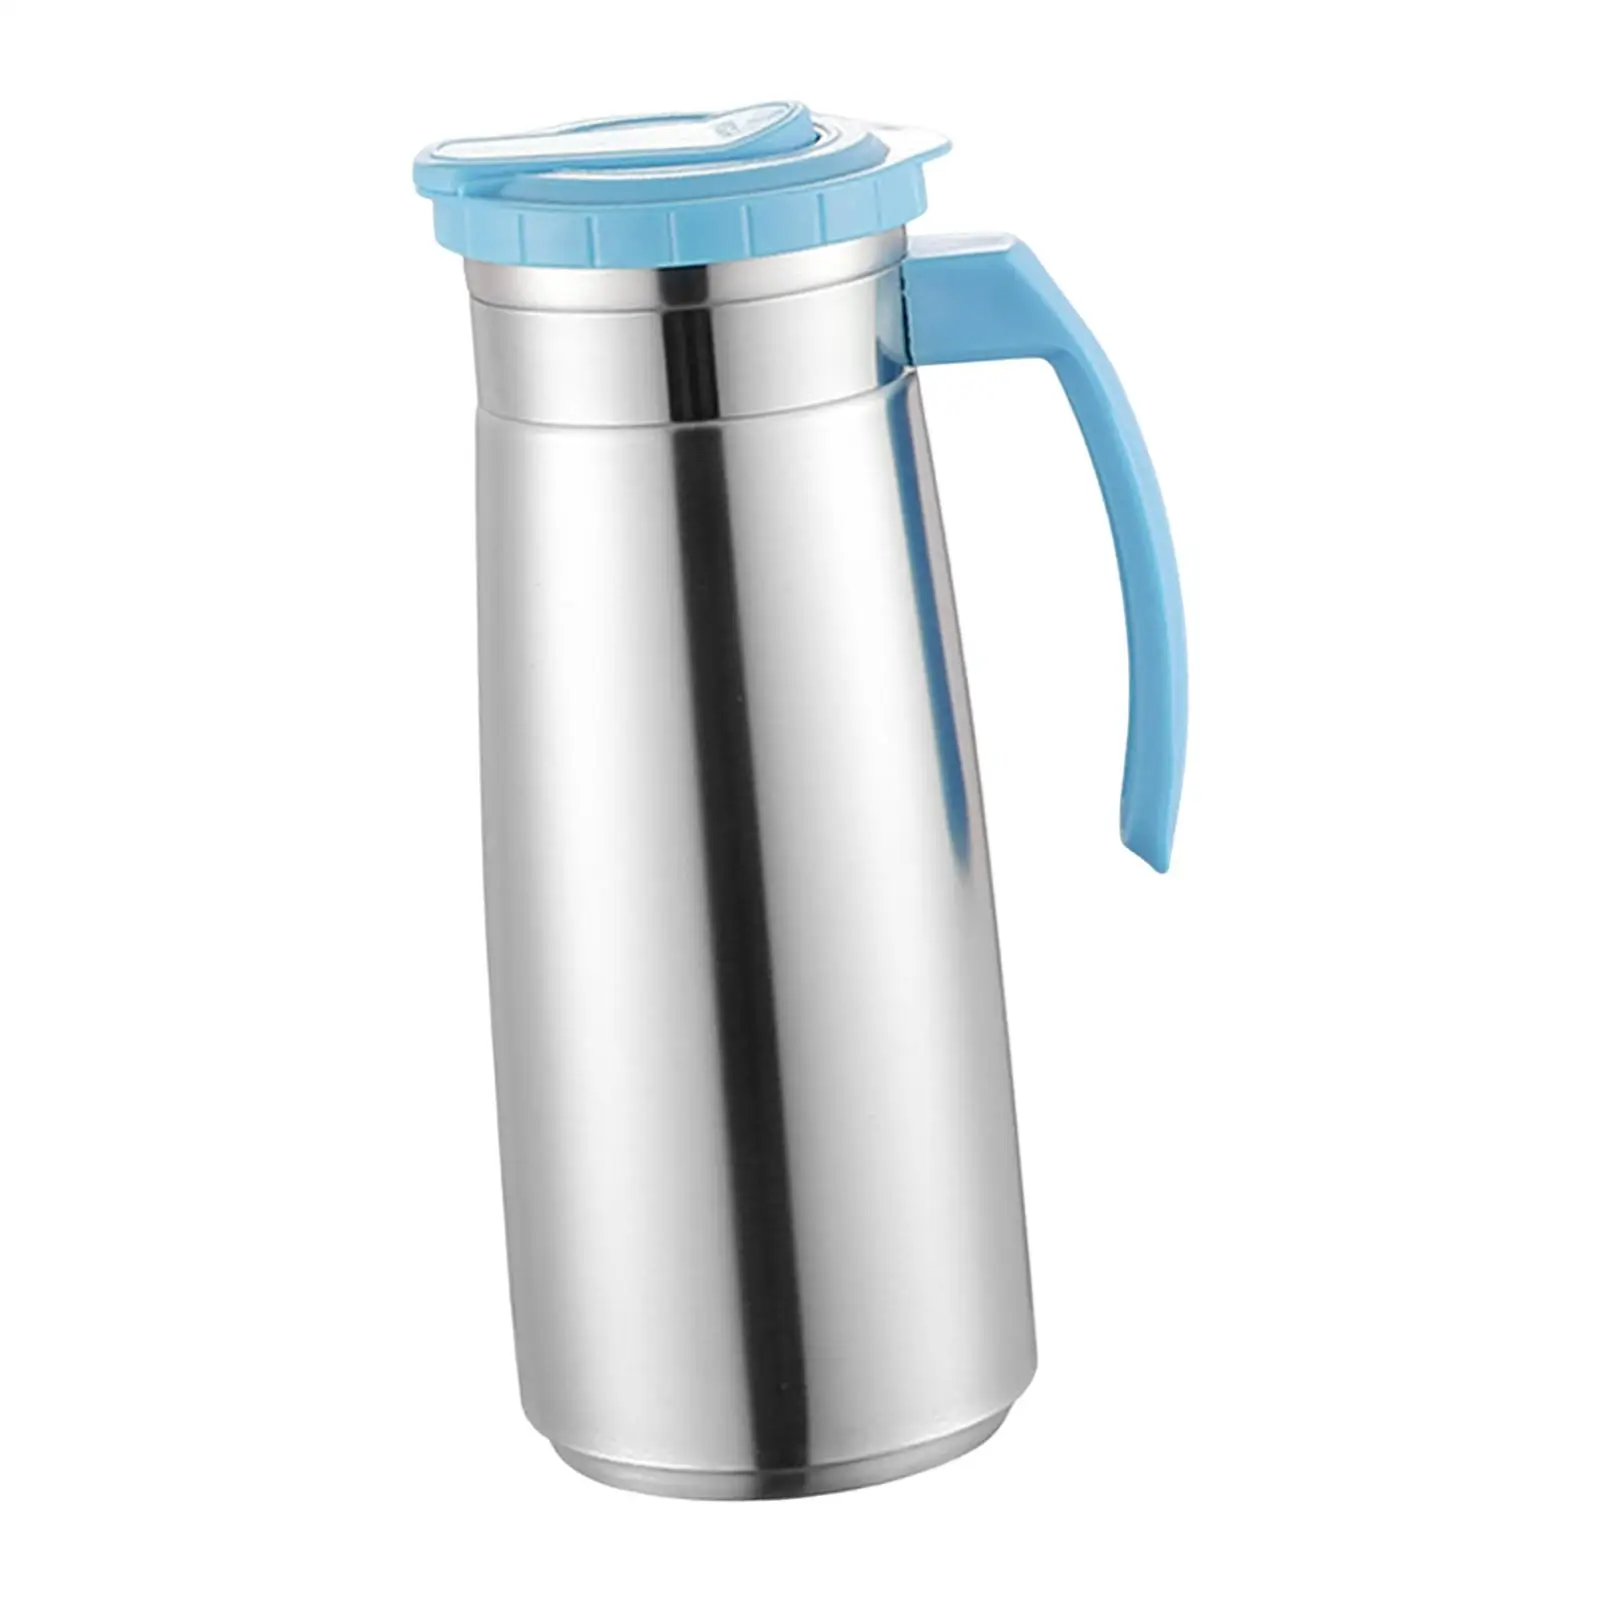 Stainless Steel Jug Cold Kettle Drinks Water Jug Beverage Jar Water Pitcher for Barbecue Kitchen Fridge Party Household